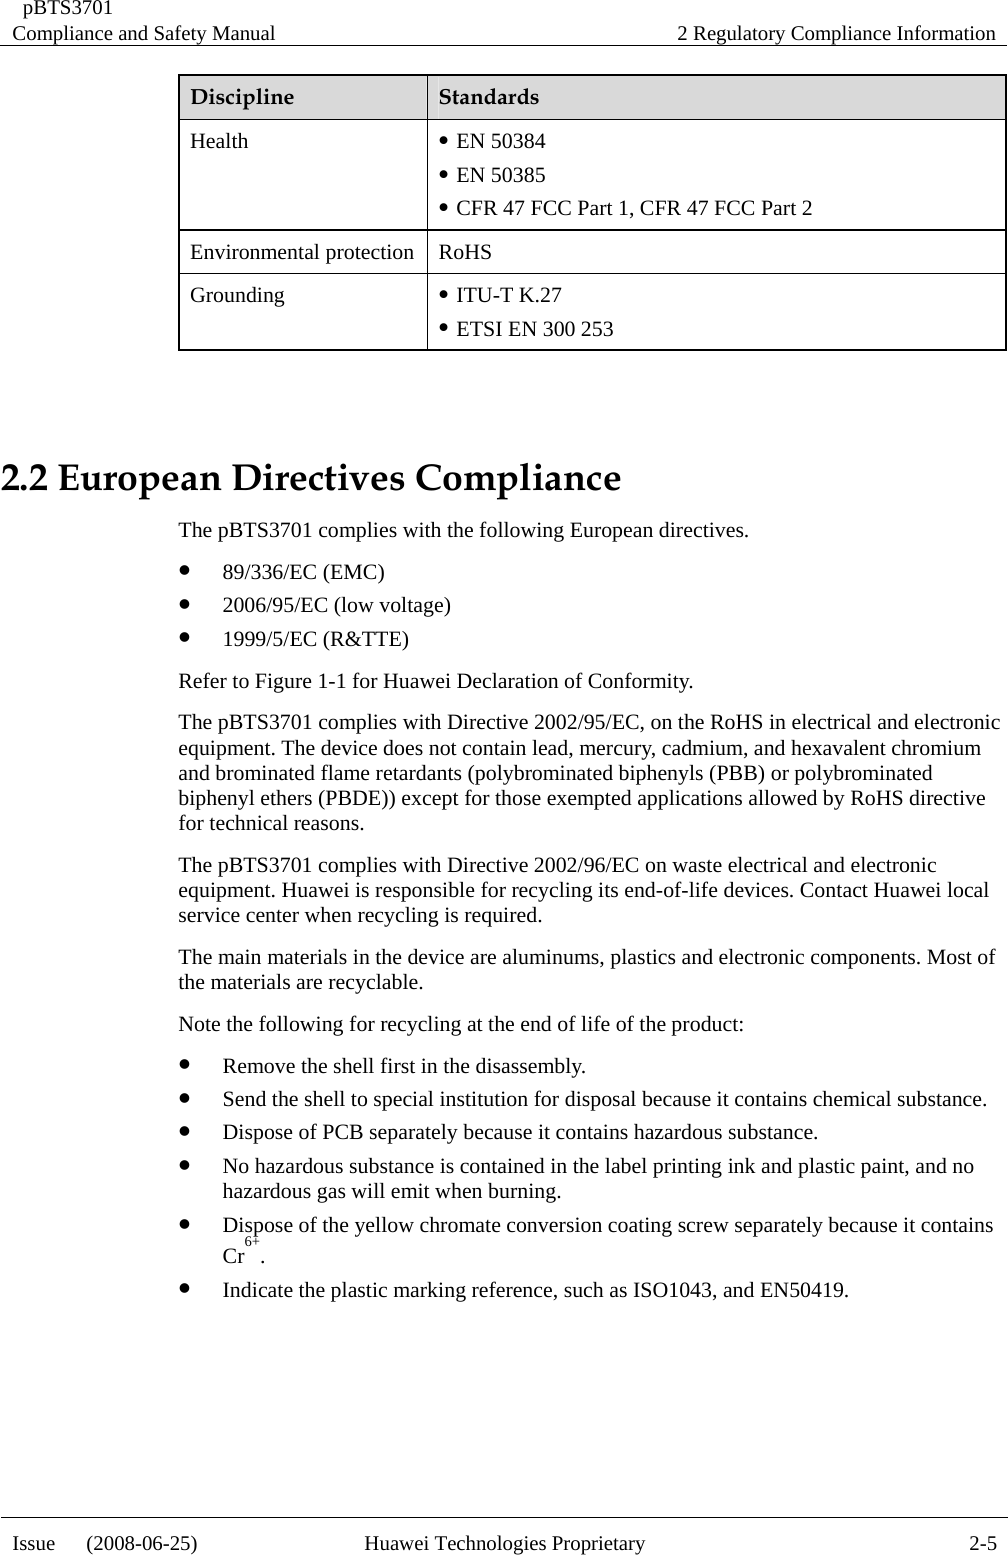  pBTS3701 Compliance and Safety Manual  2 Regulatory Compliance Information Issue   (2008-06-25)  Huawei Technologies Proprietary  2-5Discipline  Standards Health  z EN 50384 z EN 50385 z CFR 47 FCC Part 1, CFR 47 FCC Part 2 Environmental protection RoHS Grounding  z ITU-T K.27 z ETSI EN 300 253  2.2 European Directives Compliance The pBTS3701 complies with the following European directives. z 89/336/EC (EMC) z 2006/95/EC (low voltage) z 1999/5/EC (R&amp;TTE) Refer to Figure 1-1 for Huawei Declaration of Conformity. The pBTS3701 complies with Directive 2002/95/EC, on the RoHS in electrical and electronic equipment. The device does not contain lead, mercury, cadmium, and hexavalent chromium and brominated flame retardants (polybrominated biphenyls (PBB) or polybrominated biphenyl ethers (PBDE)) except for those exempted applications allowed by RoHS directive for technical reasons. The pBTS3701 complies with Directive 2002/96/EC on waste electrical and electronic equipment. Huawei is responsible for recycling its end-of-life devices. Contact Huawei local service center when recycling is required. The main materials in the device are aluminums, plastics and electronic components. Most of the materials are recyclable. Note the following for recycling at the end of life of the product: z Remove the shell first in the disassembly.   z Send the shell to special institution for disposal because it contains chemical substance.   z Dispose of PCB separately because it contains hazardous substance.   z No hazardous substance is contained in the label printing ink and plastic paint, and no hazardous gas will emit when burning. z Dispose of the yellow chromate conversion coating screw separately because it contains Cr6+. z Indicate the plastic marking reference, such as ISO1043, and EN50419.   